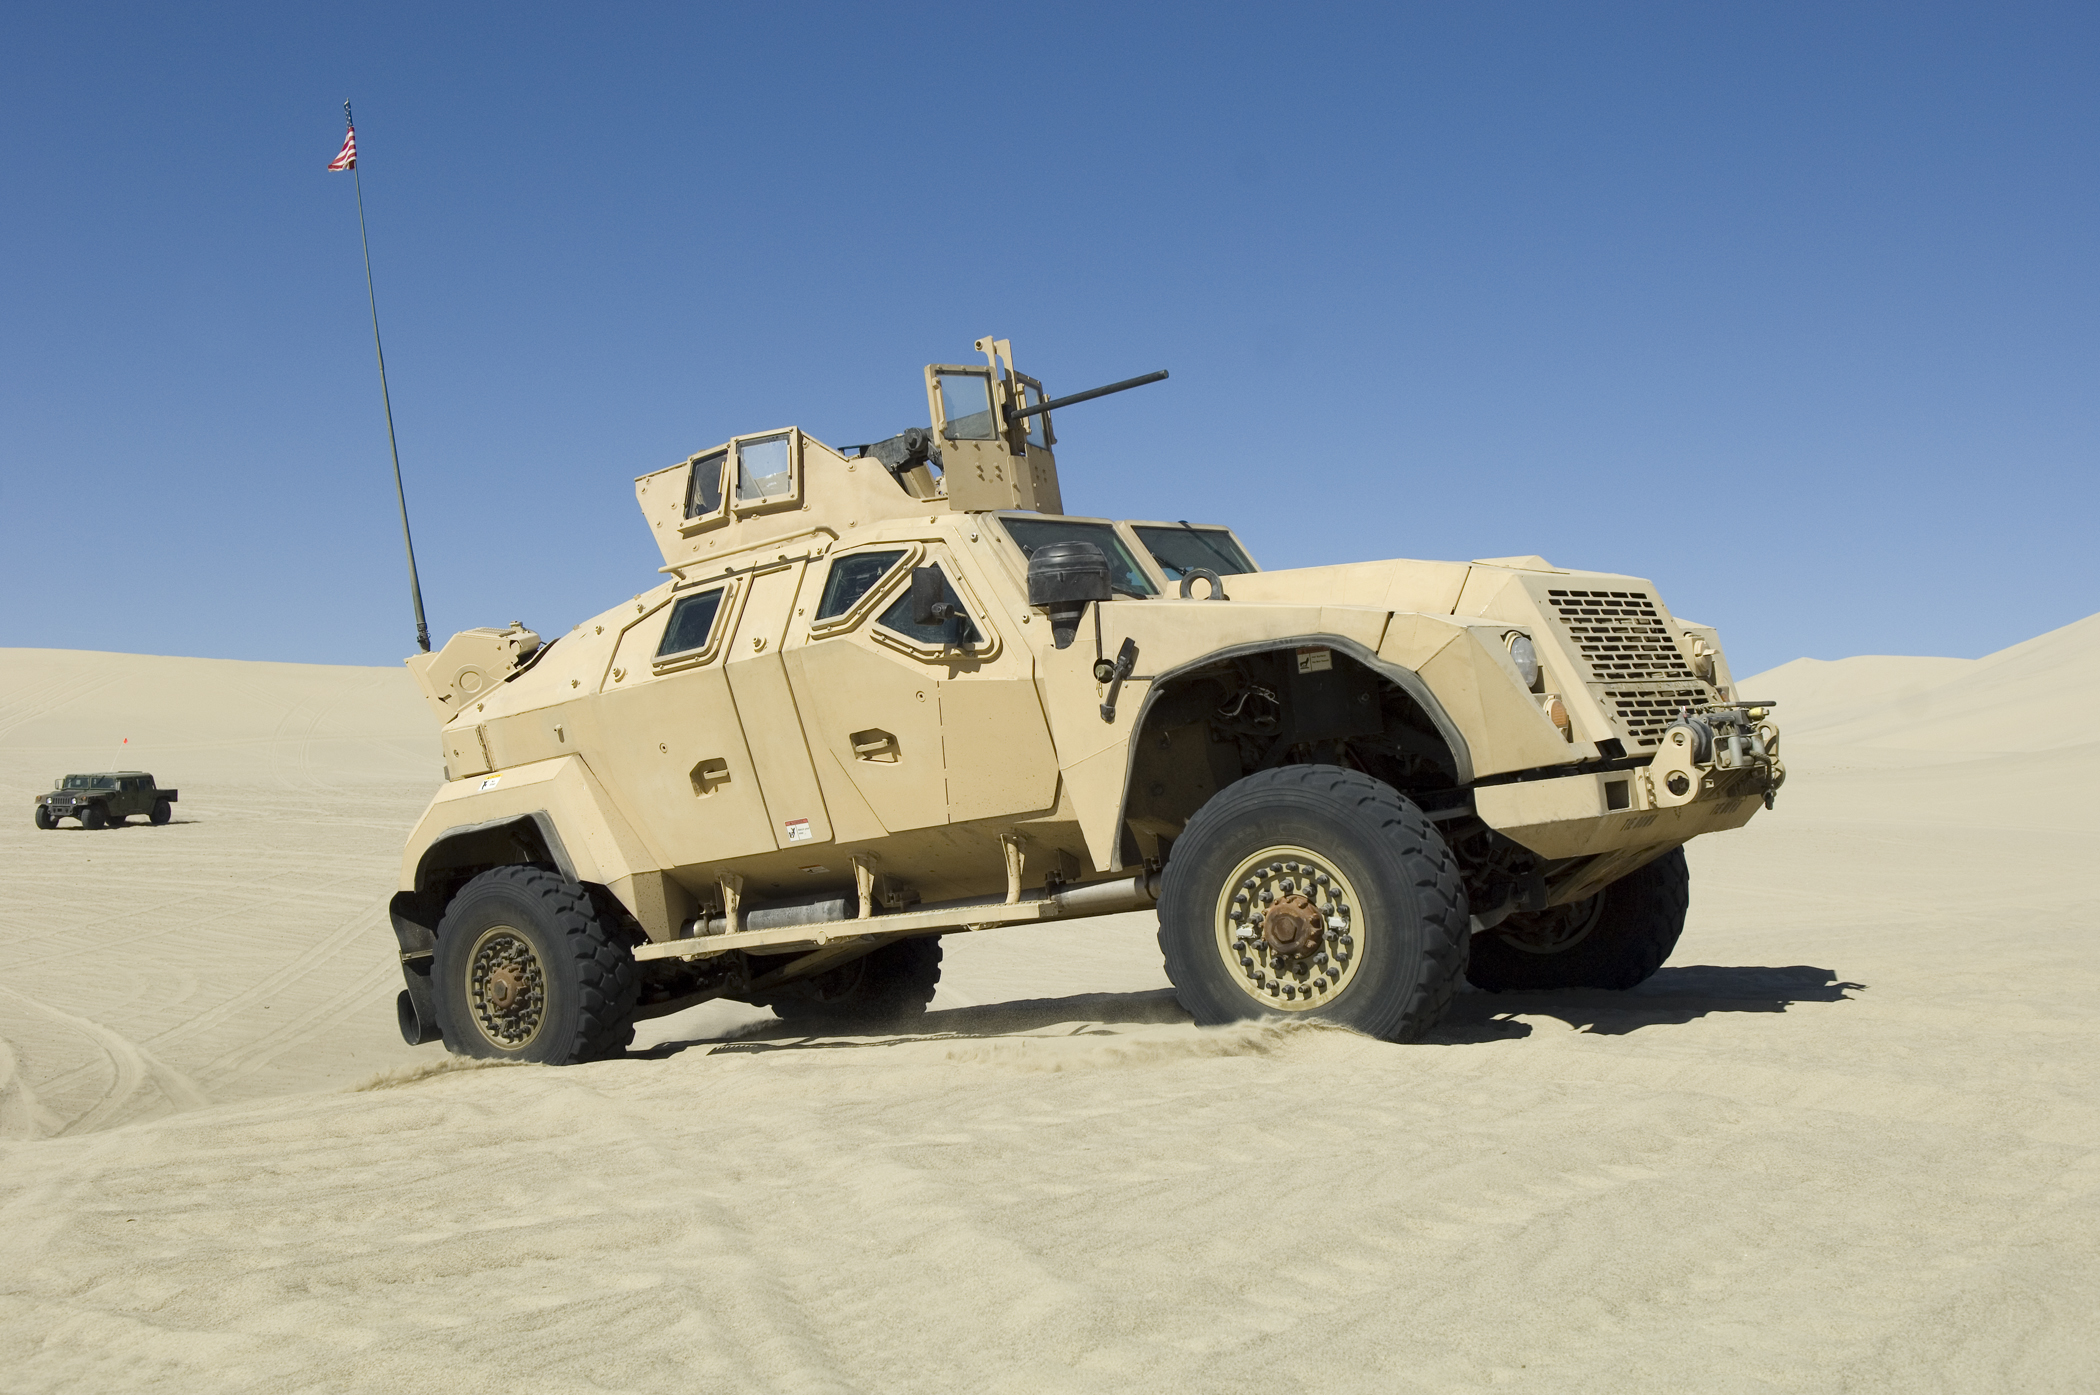    CARSON CITY, Nev.  - The combat tactical vehicle technology demonstrator (CTV-TD) is undergoing automotive testing at the Nevada Automotive test Center (NATC) in Carson City. Built under contract for the Office of Naval Research, the CTV-TD is a t